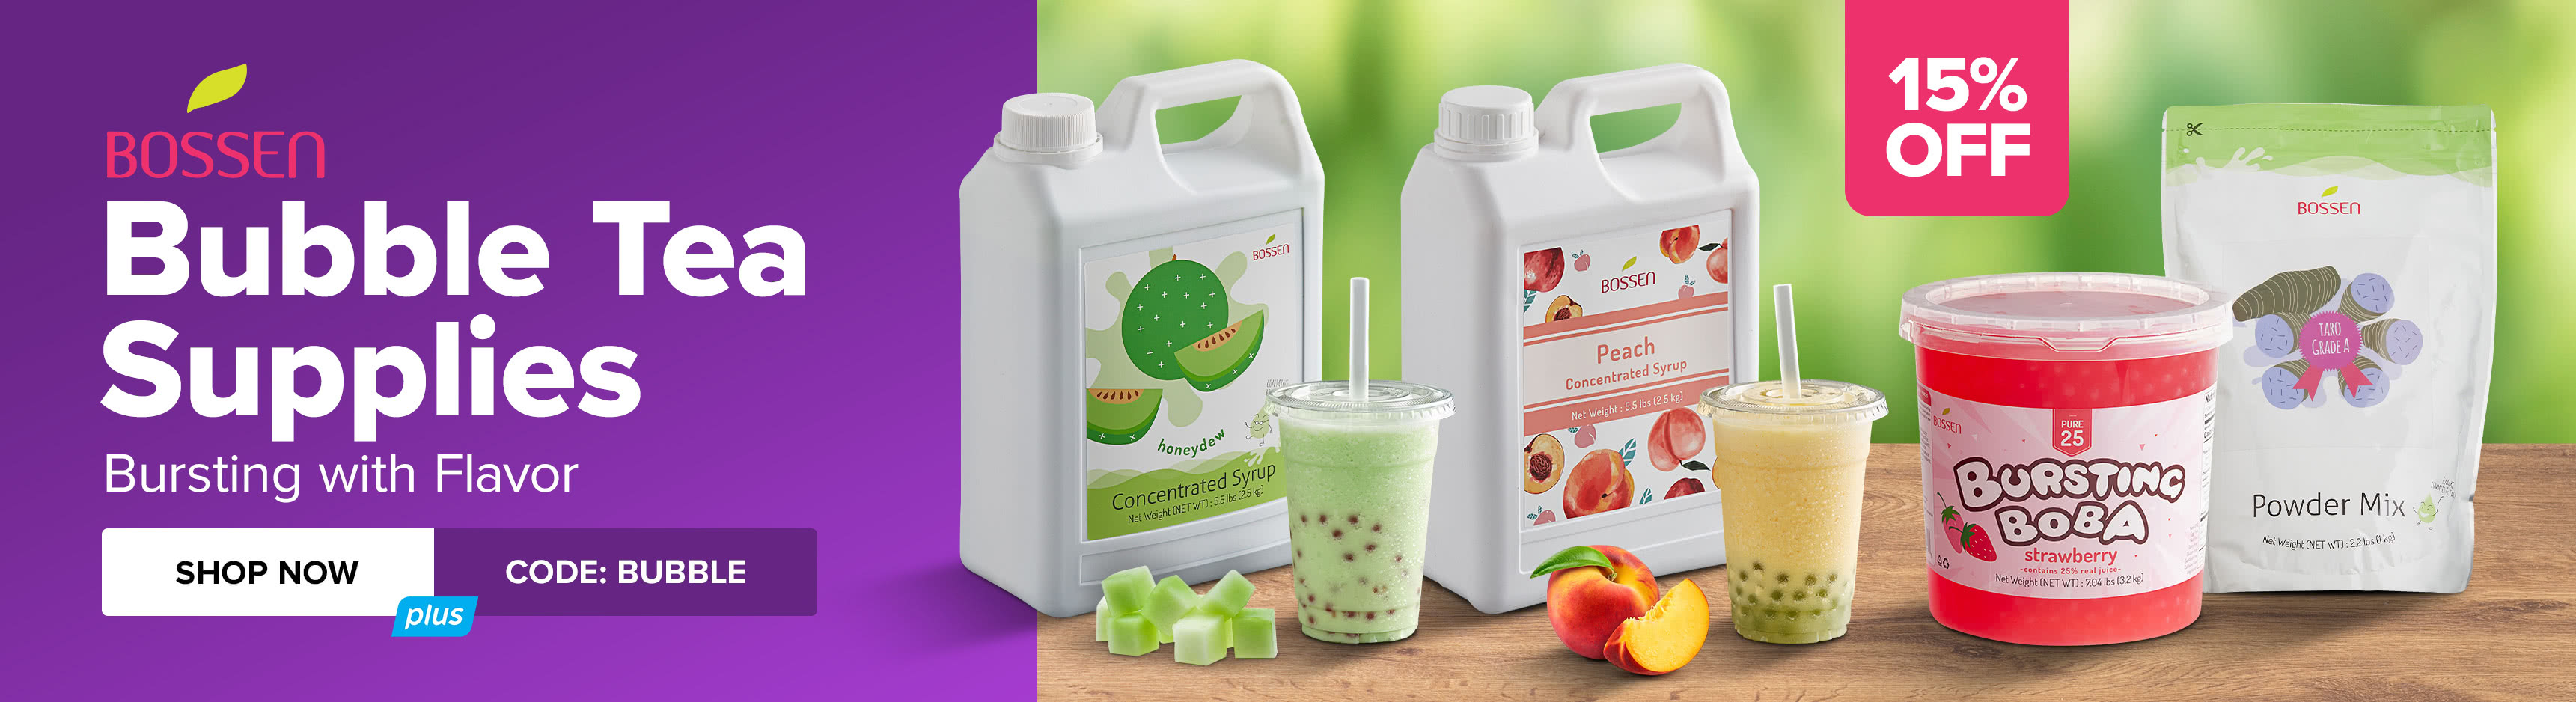 Bossen Bubble Tea Supplies - Bursting with Flavor. Shop and Save 15% on Hundreds of Eligible Items with Code BUBBLE.